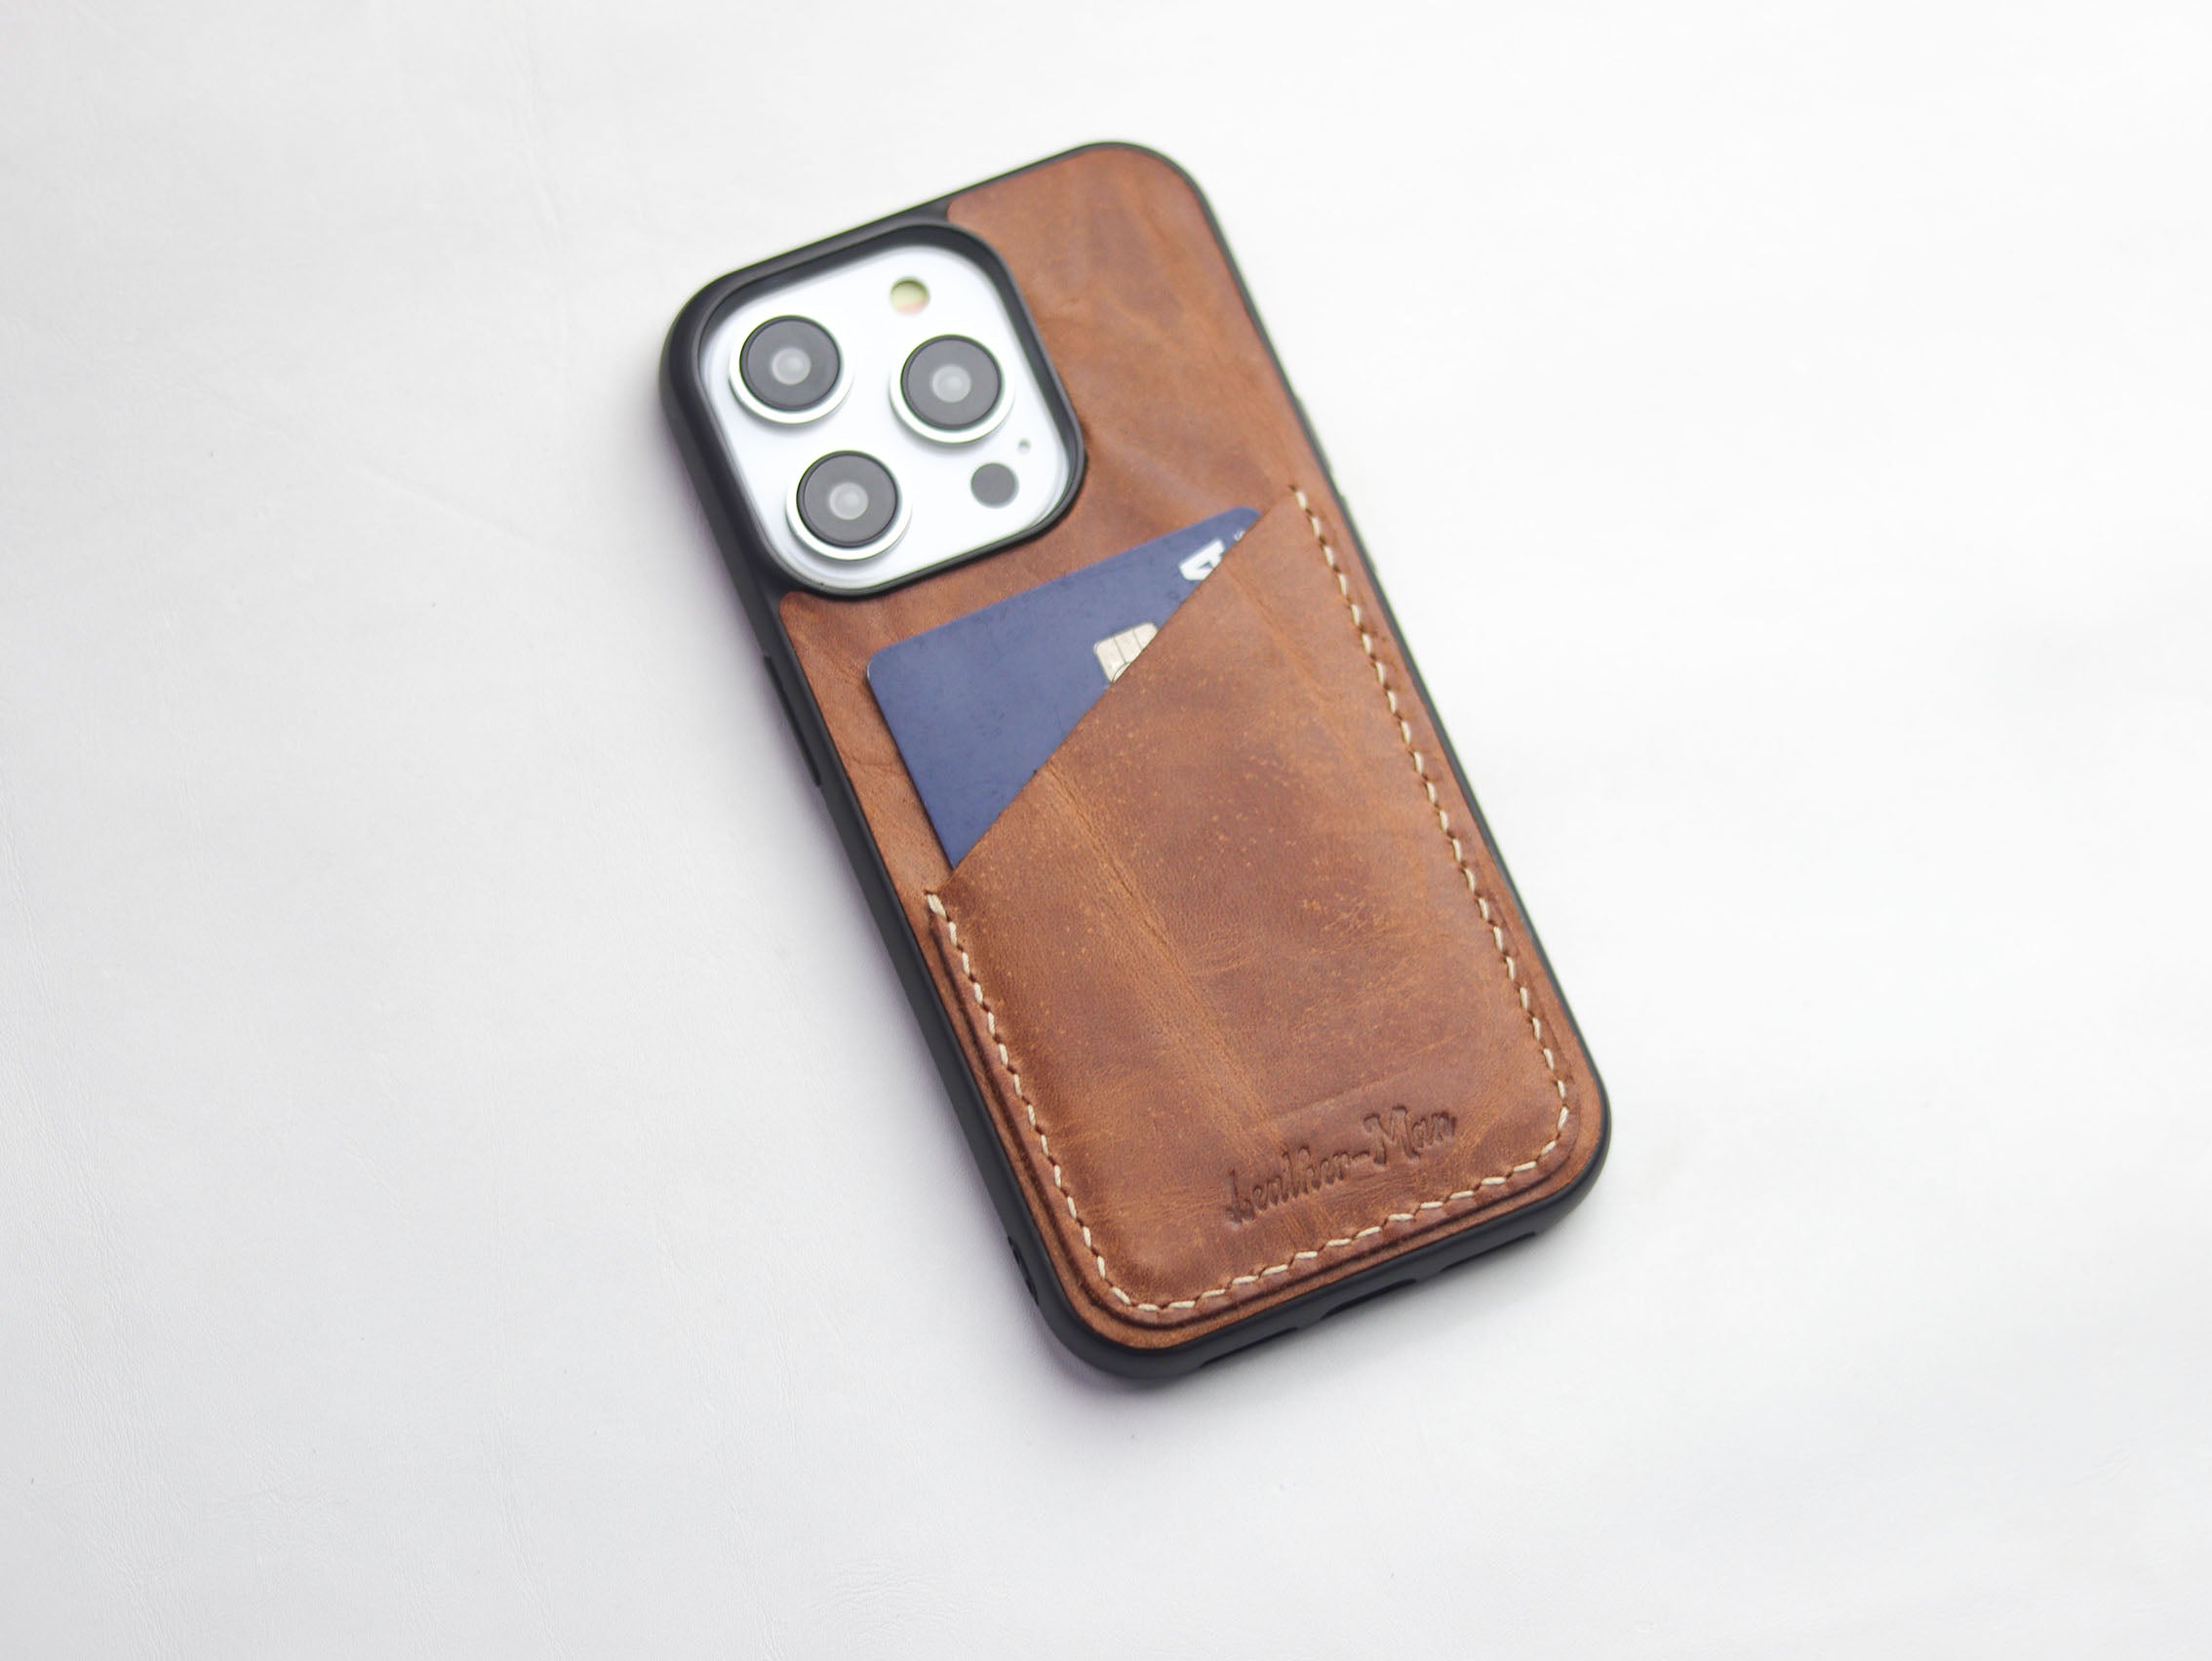 CARAMEL BROWN LEATHER WALLET PHONE CASE